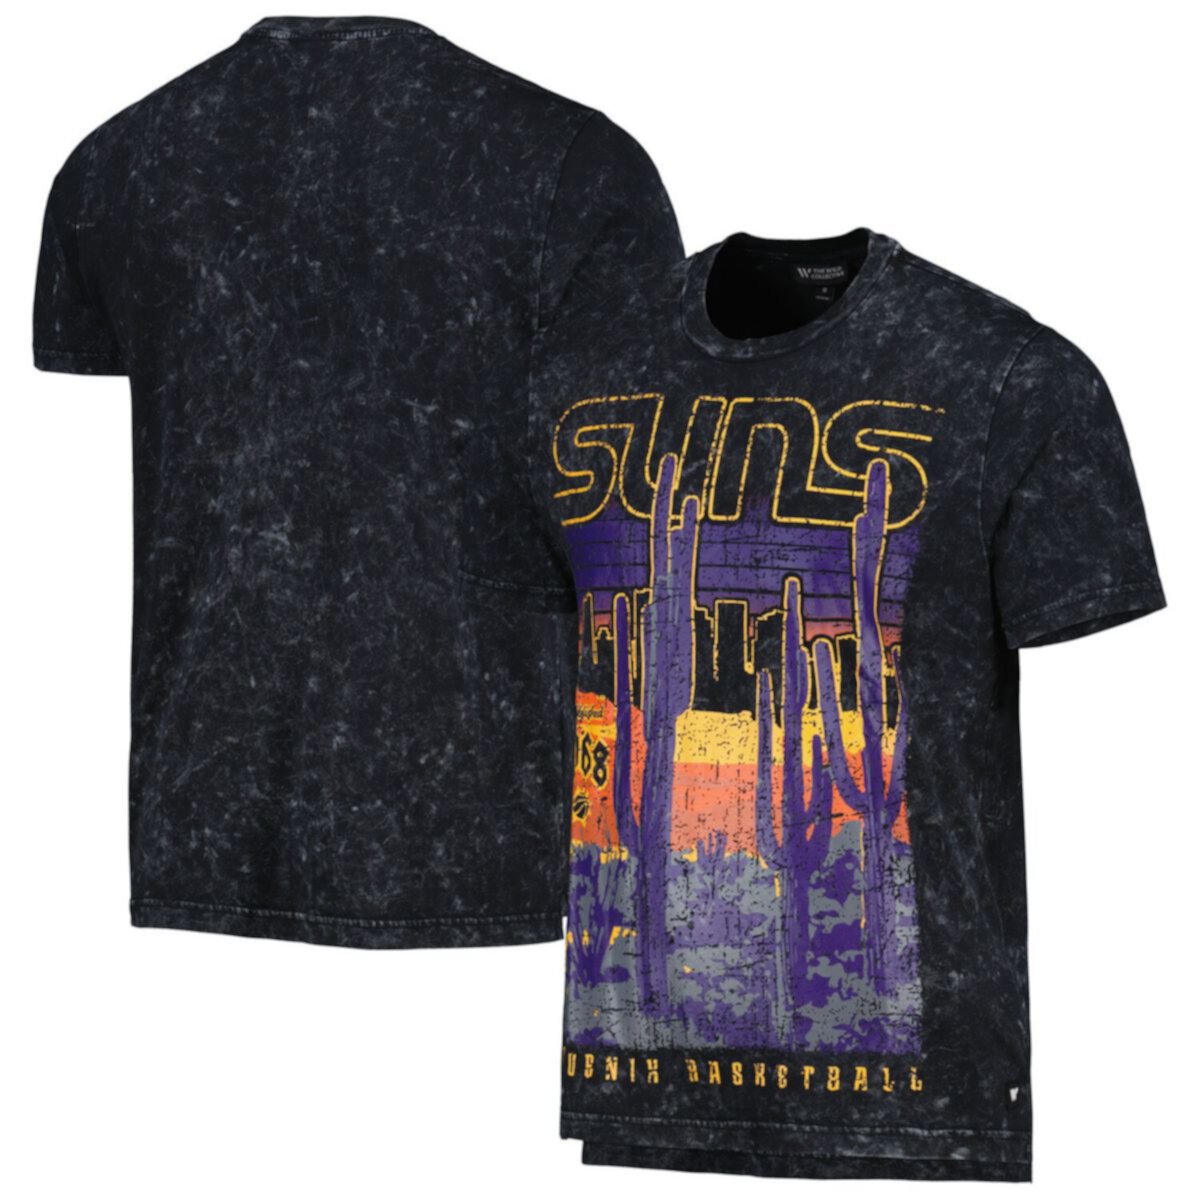 Unisex The Wild Collective Black/Purple Phoenix Suns Band T-Shirt The Wild Collective